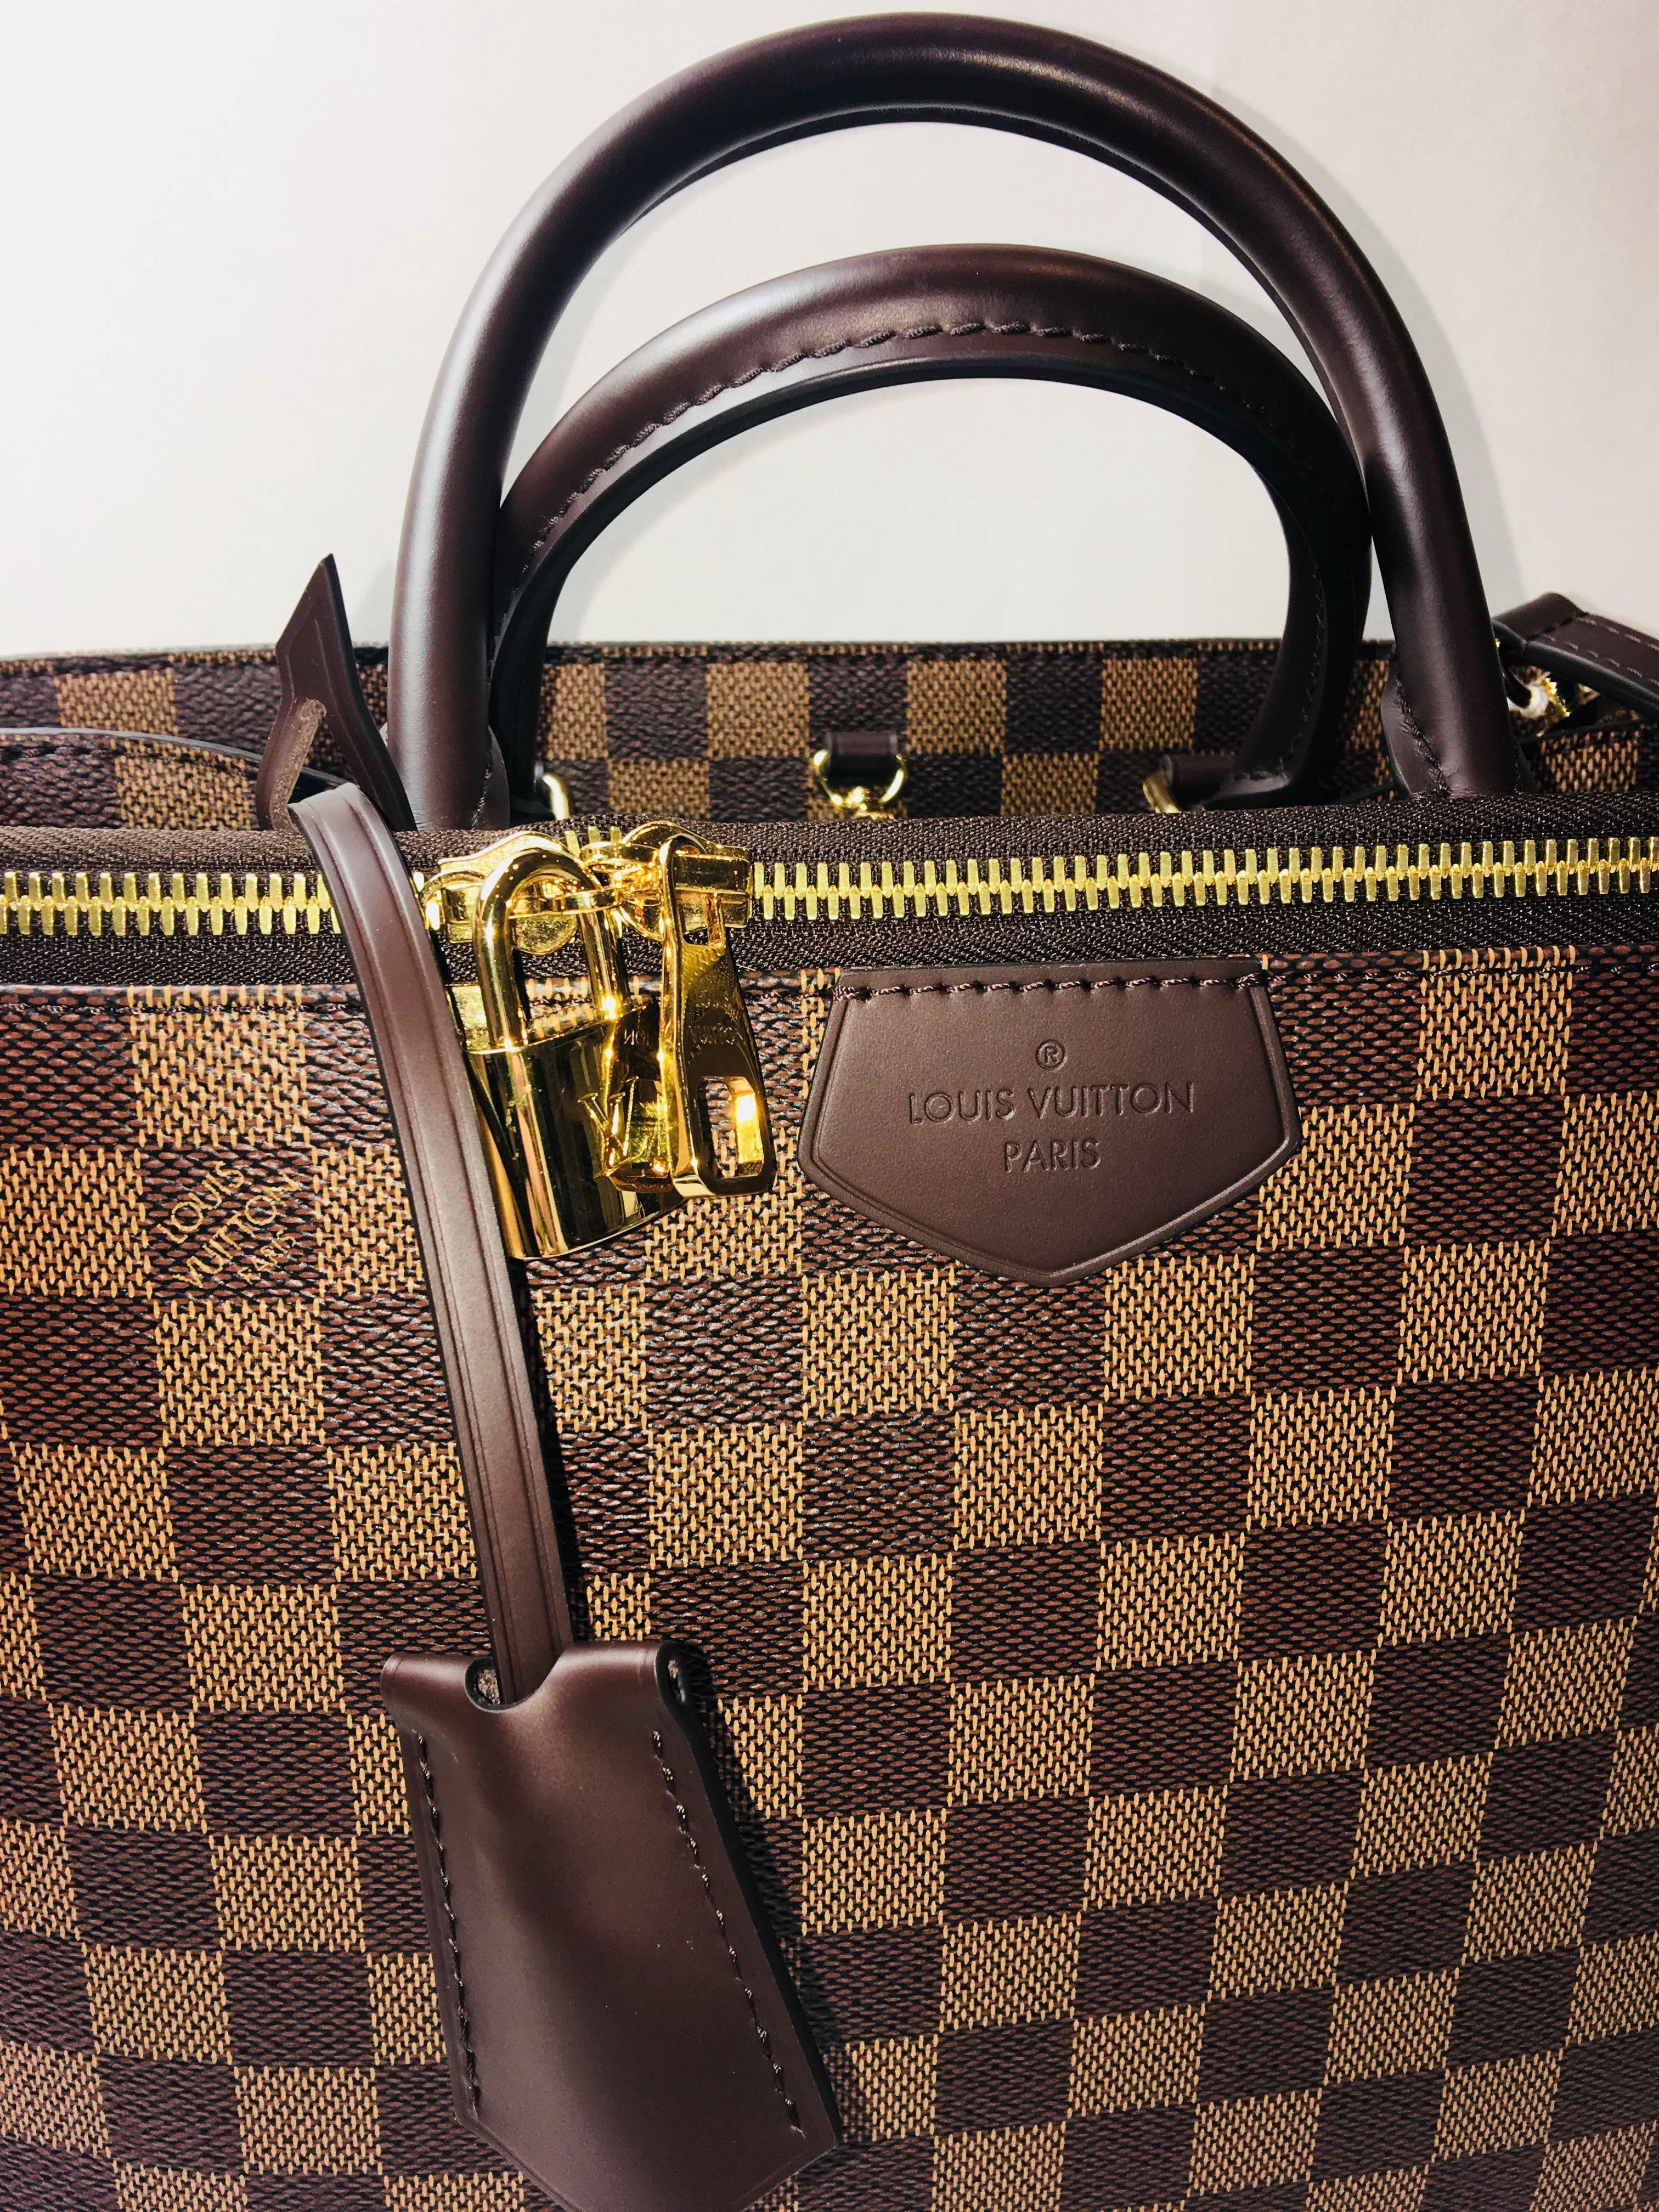 Louis Vuitton Double Handle Bag with Long Crossbody Strap, Side Zipper, Damier Ebene and Box.